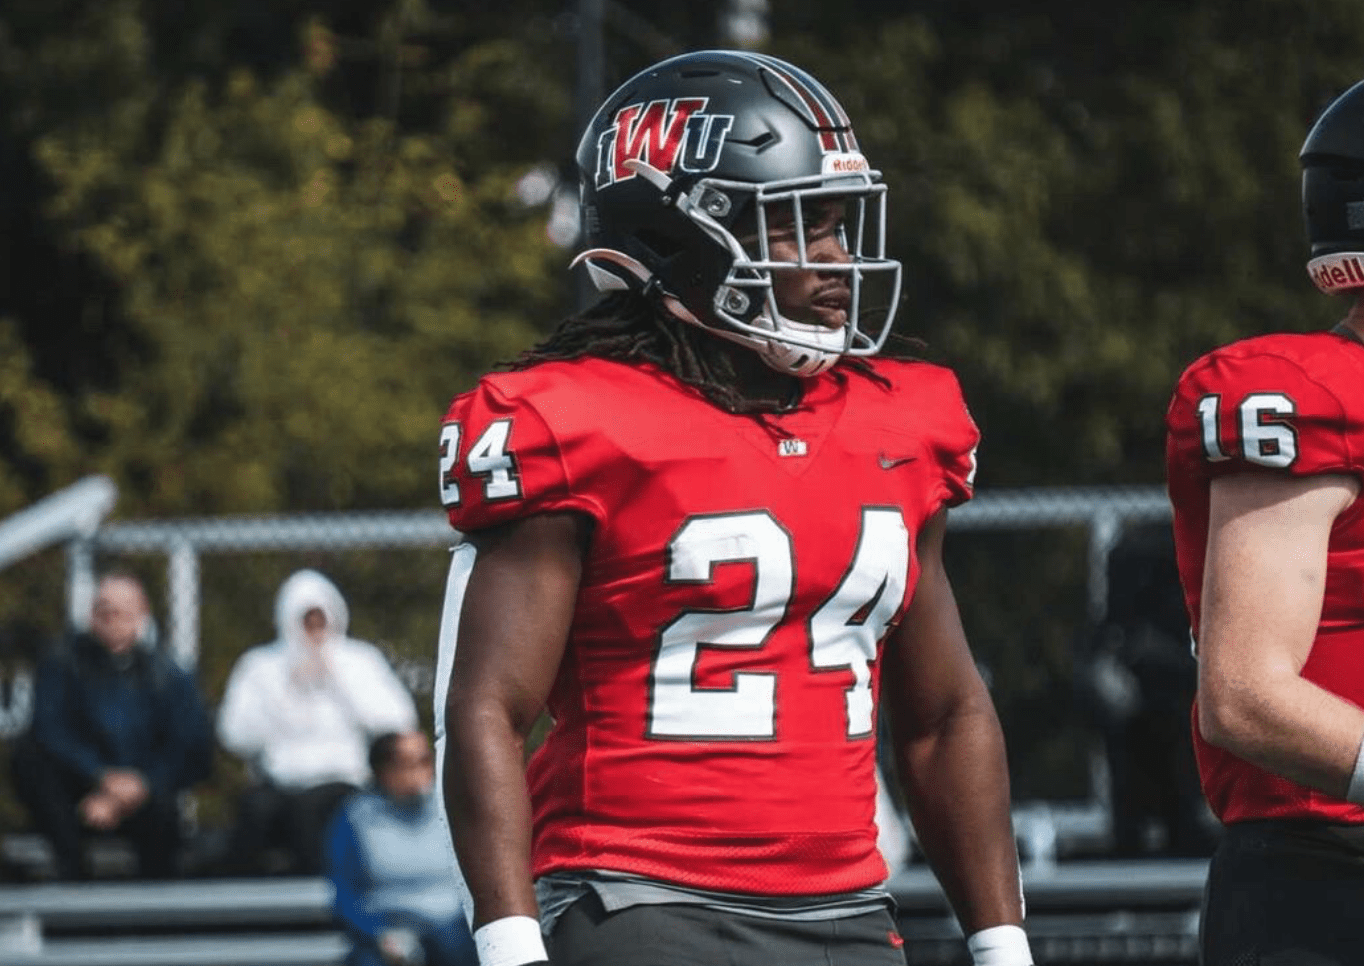 Devodney Alford the standout running back from Indiana Wesleyan University recently sat down with NFL Draft Diamonds writer Justin Berendzen